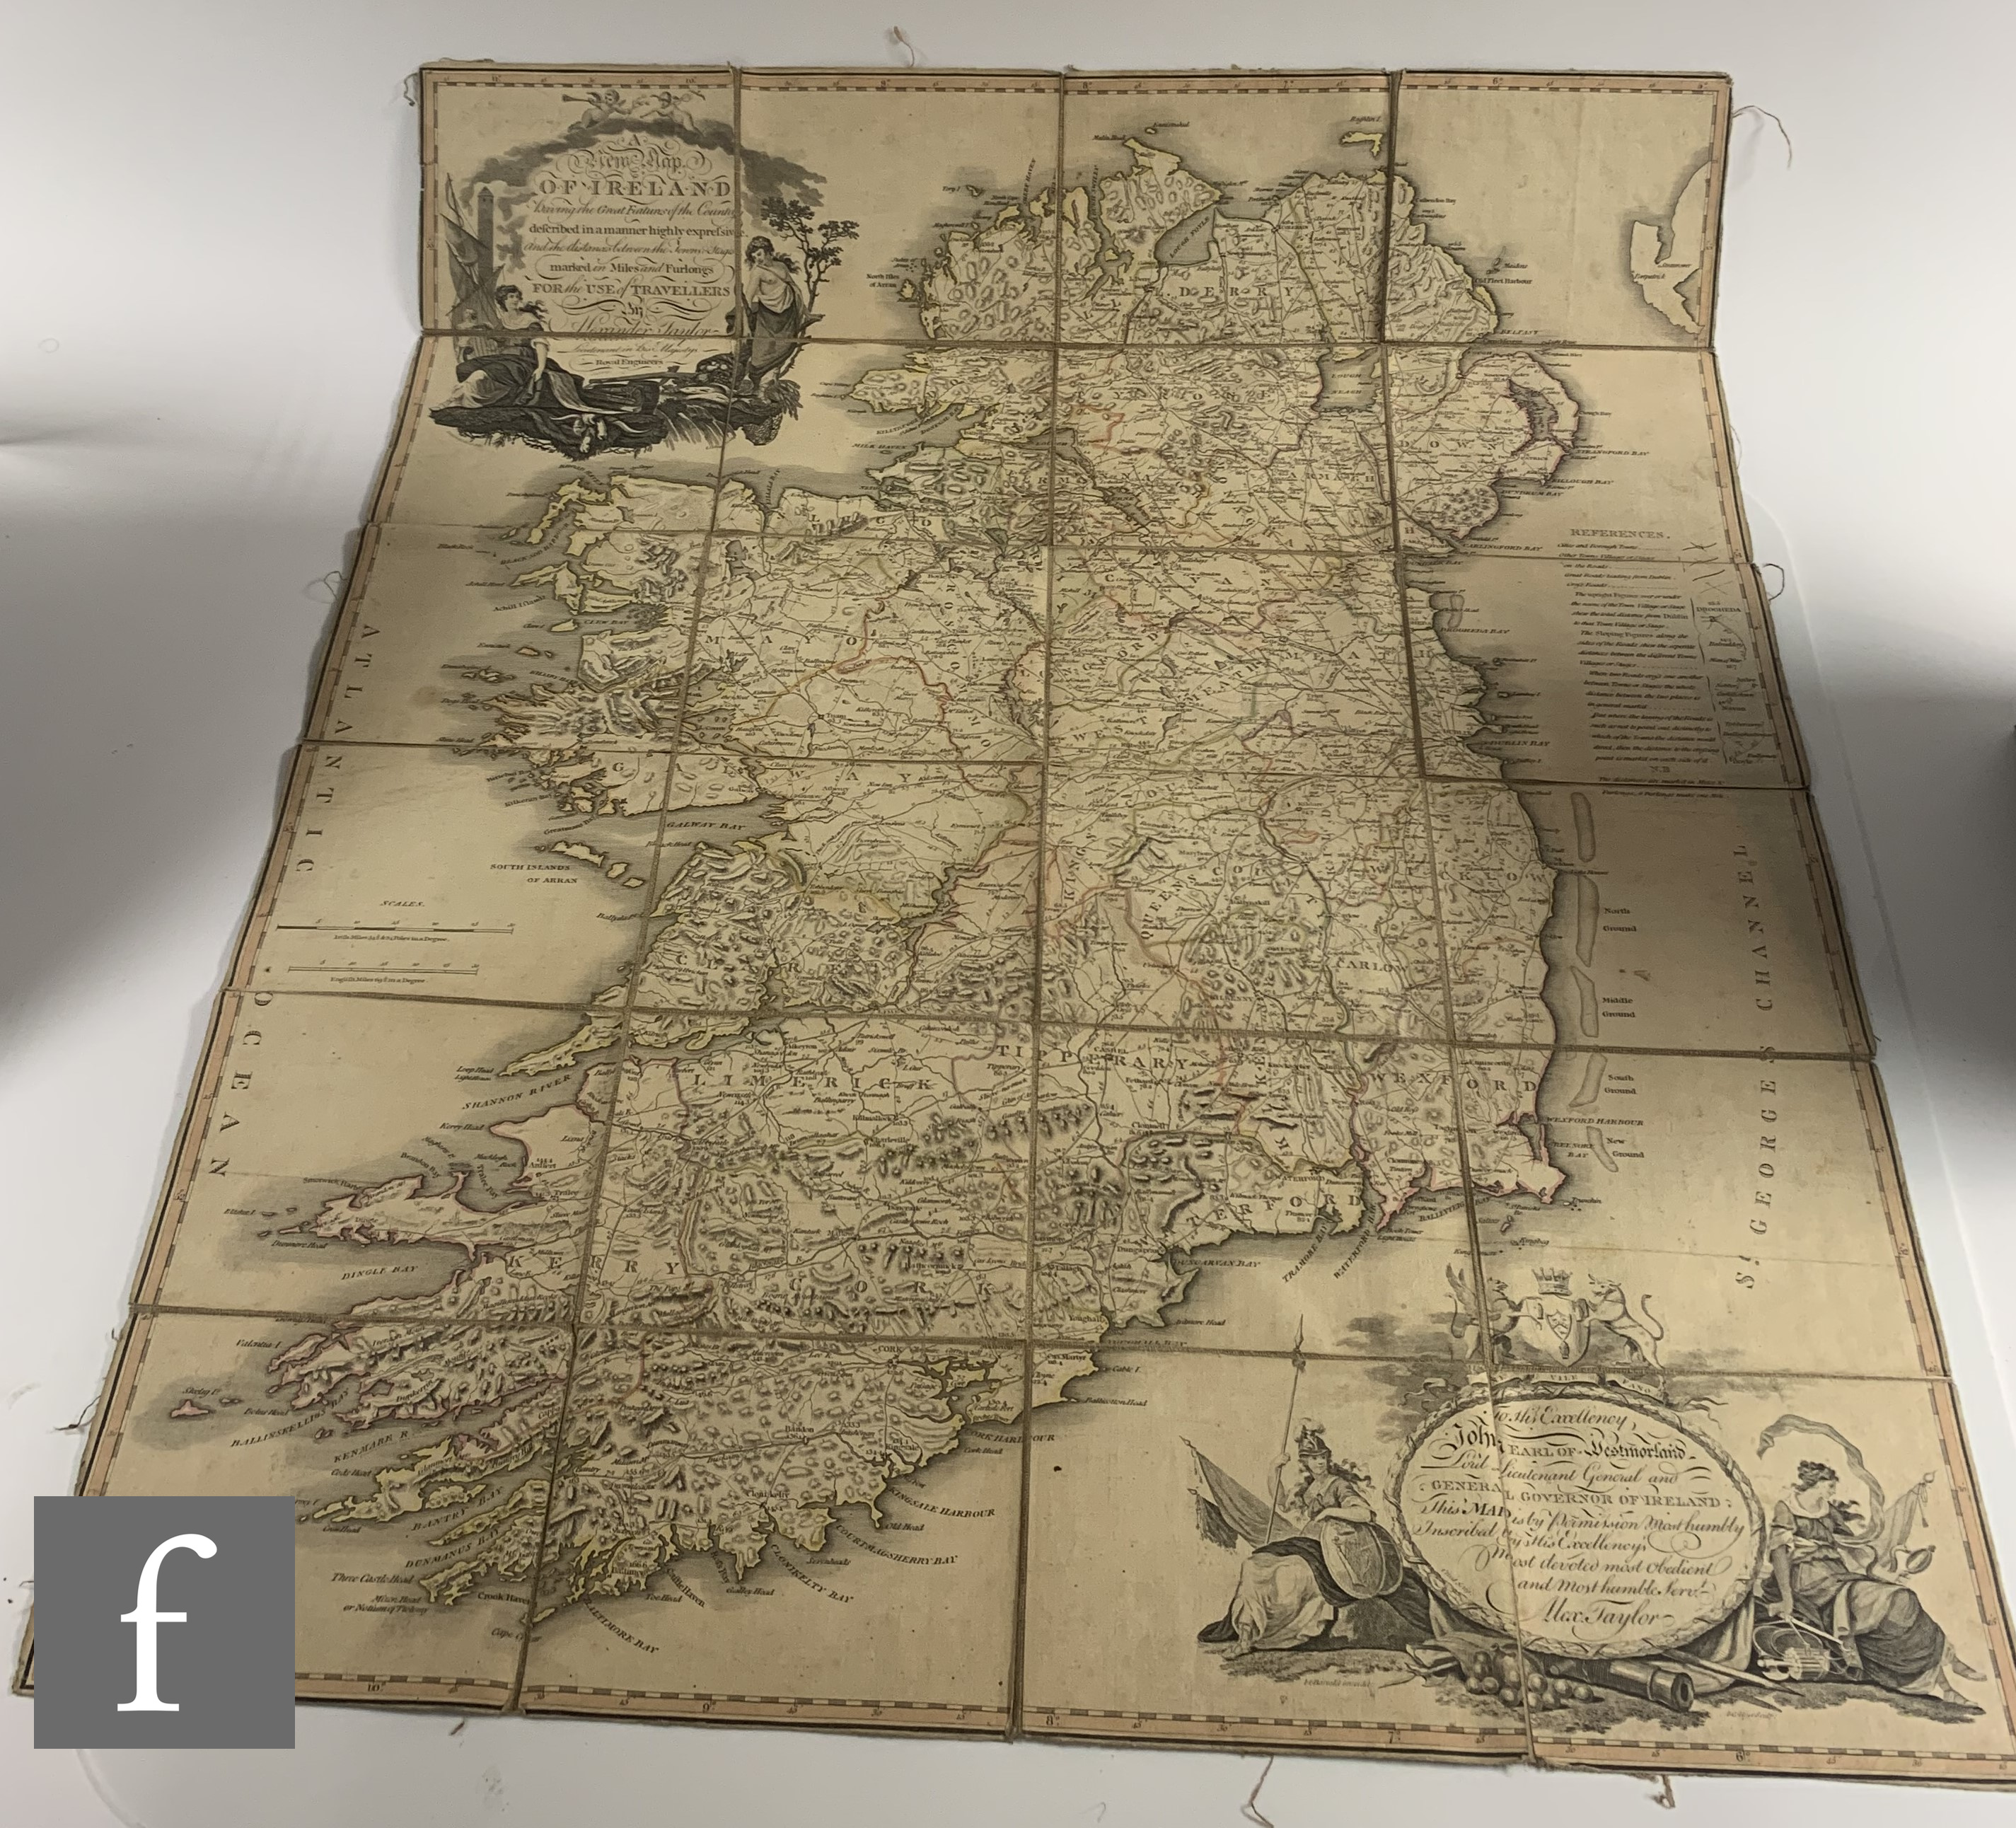 A 19th Century Cary's folding map of England and Wales, another Bowle's Seven United Provinces of - Image 3 of 5